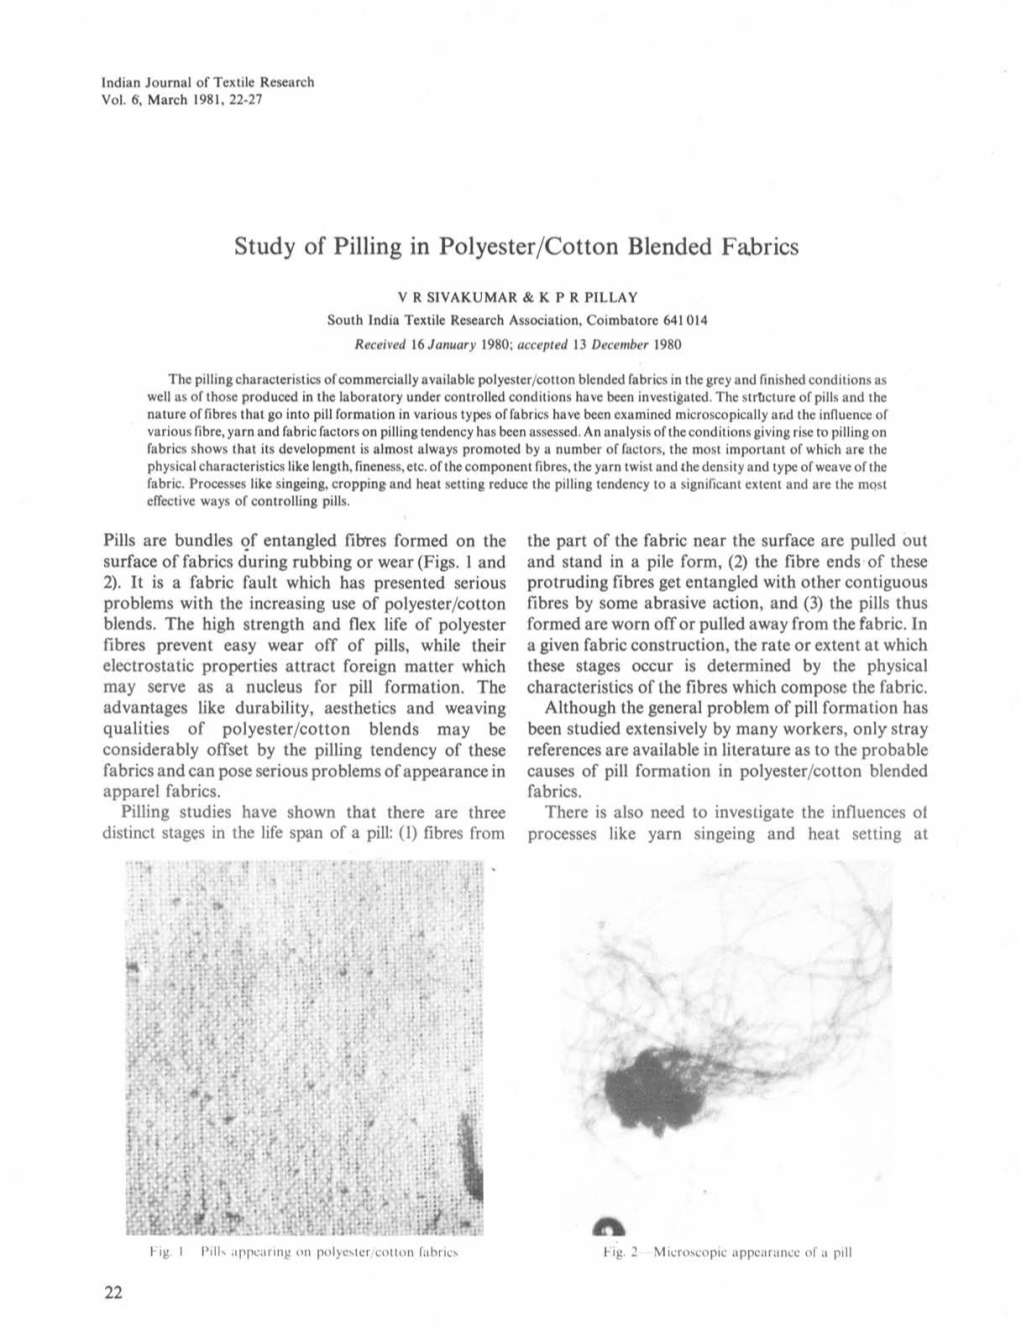 Study of Pilling in Polyester/Cotton Blended Fabrics